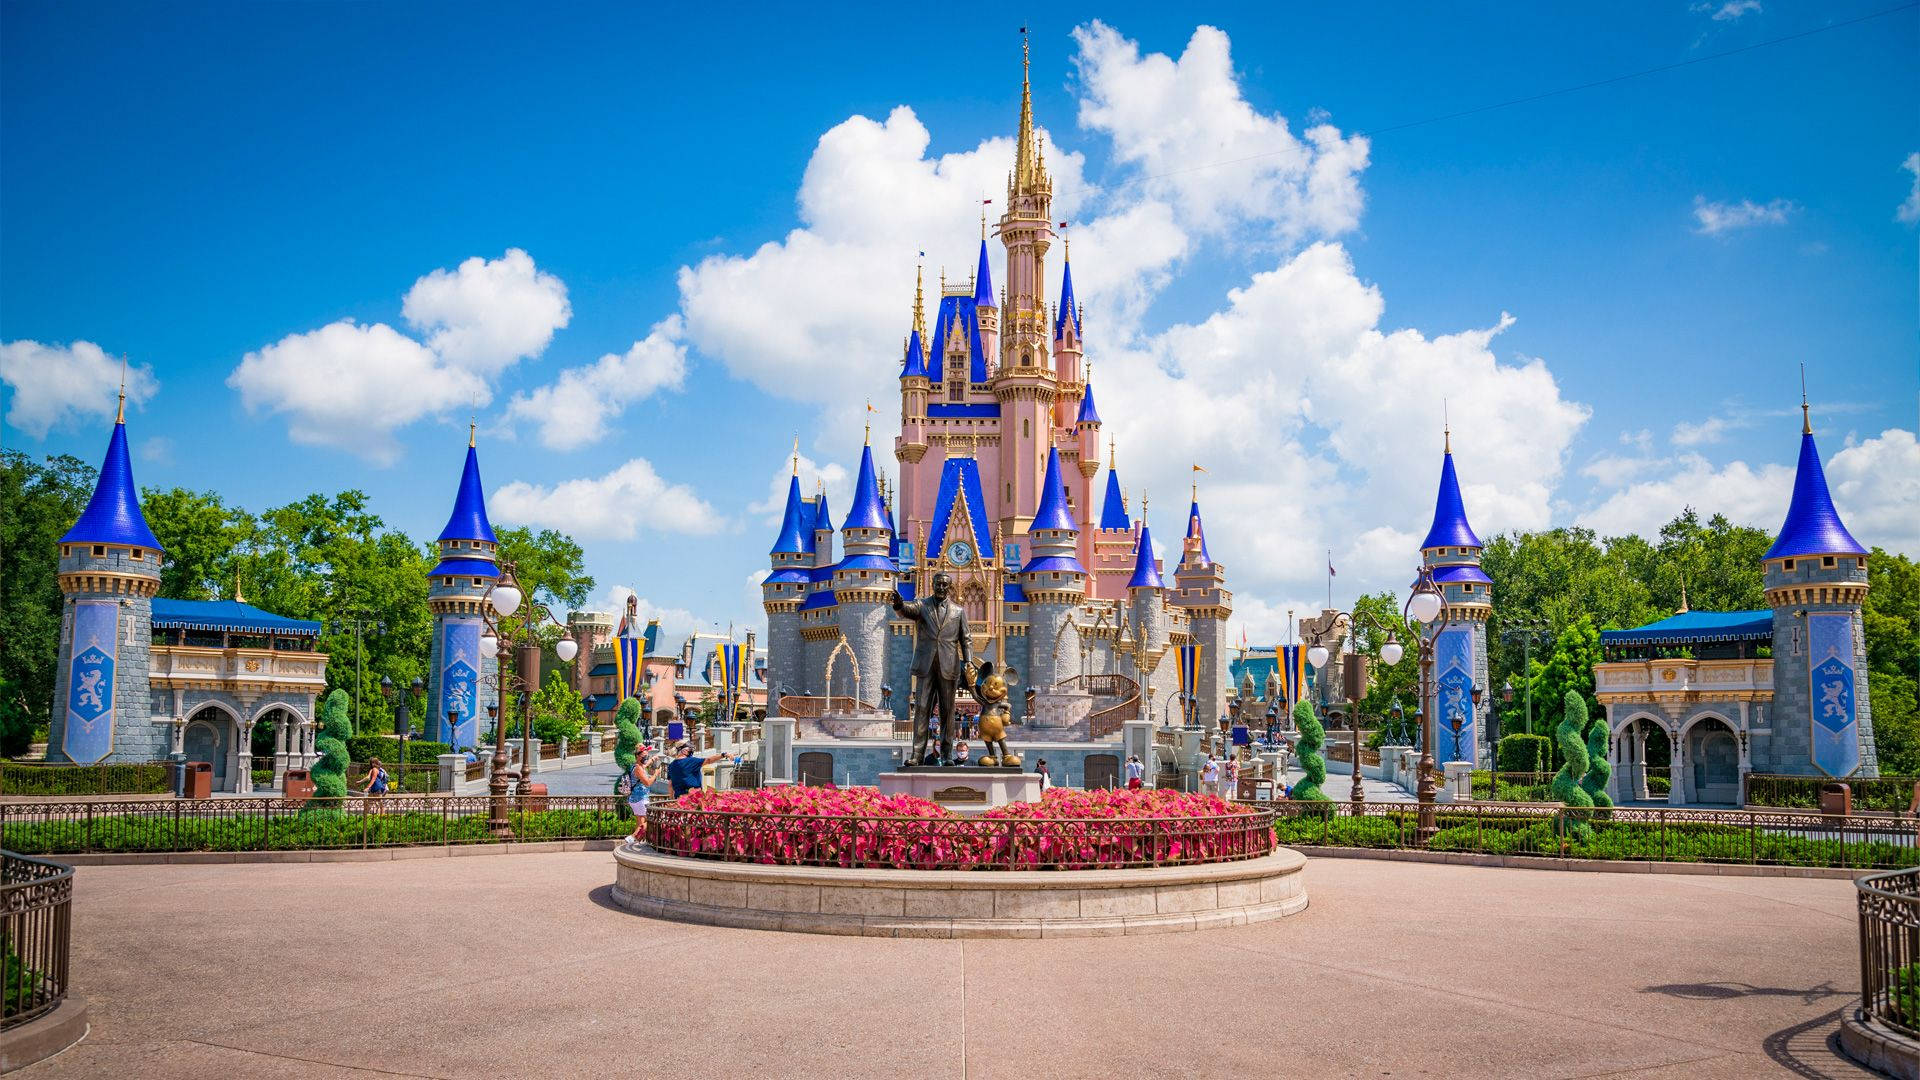 15 Stunning Disney World Wallpapers to Bring the Magic to Your Phone   AllEarsNet